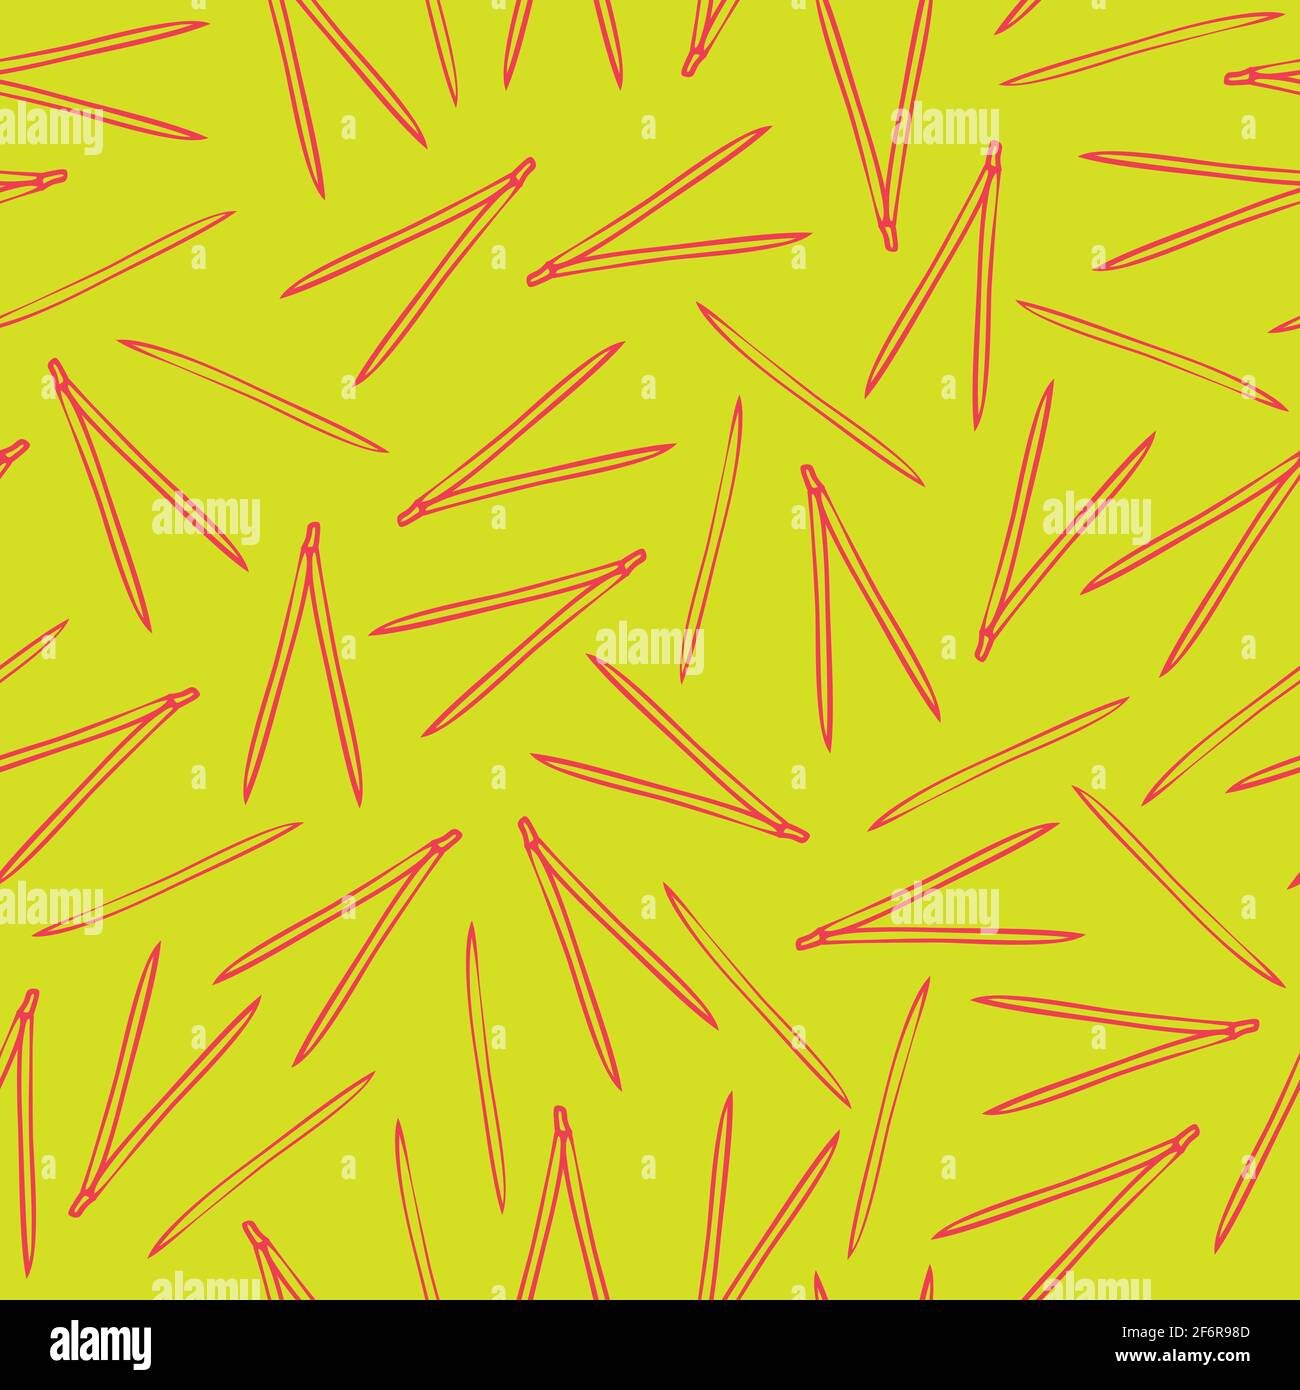 Seamless vector pattern with thorn on bright yellow background. Design for home decoration. Ideal for wallpaper, fabric, clothing etc. Stock Vector